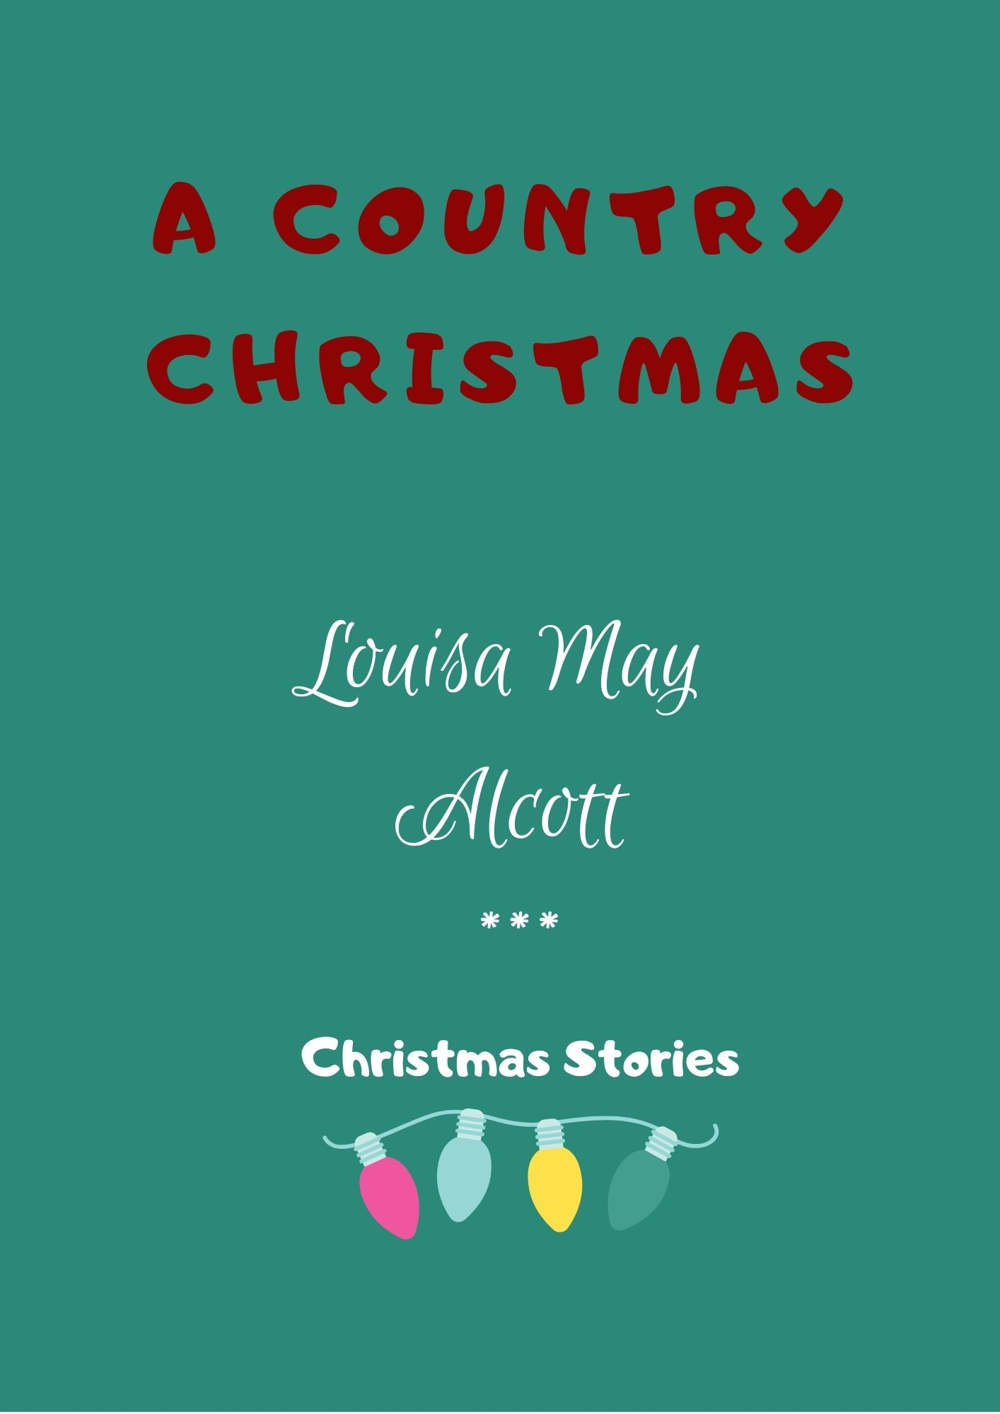 A Country Christmas by Louisa May Alcott